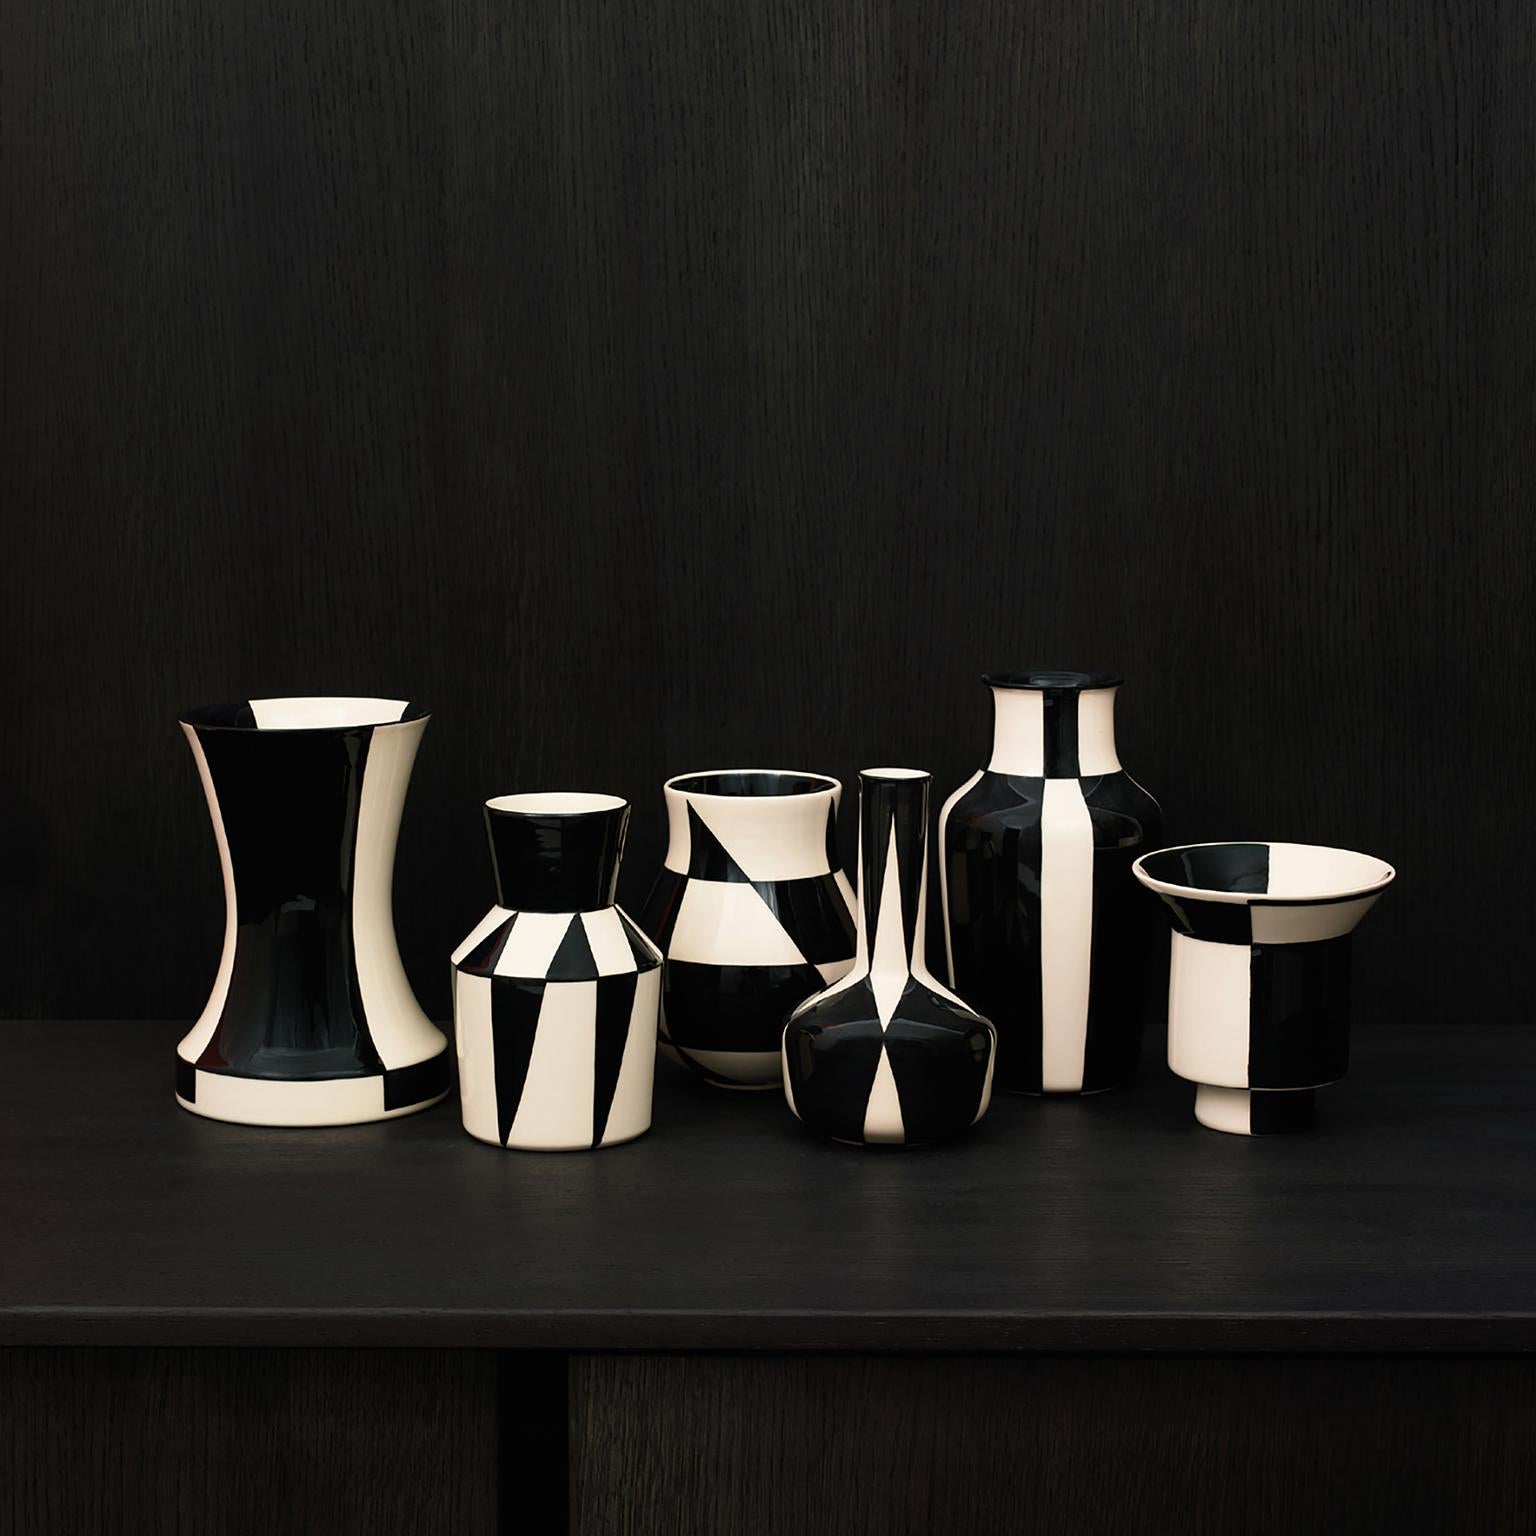 This 6 pieces Vase Ensemble is a special Edition of the Hedwig Bollhagen Werkstätten für Keramik for the Bauhaus Anniversary Year 2019. Hedwig Bollhagen was strongly influenced her designs by her colleagues the Bauhaus Alumni Werner Burri and